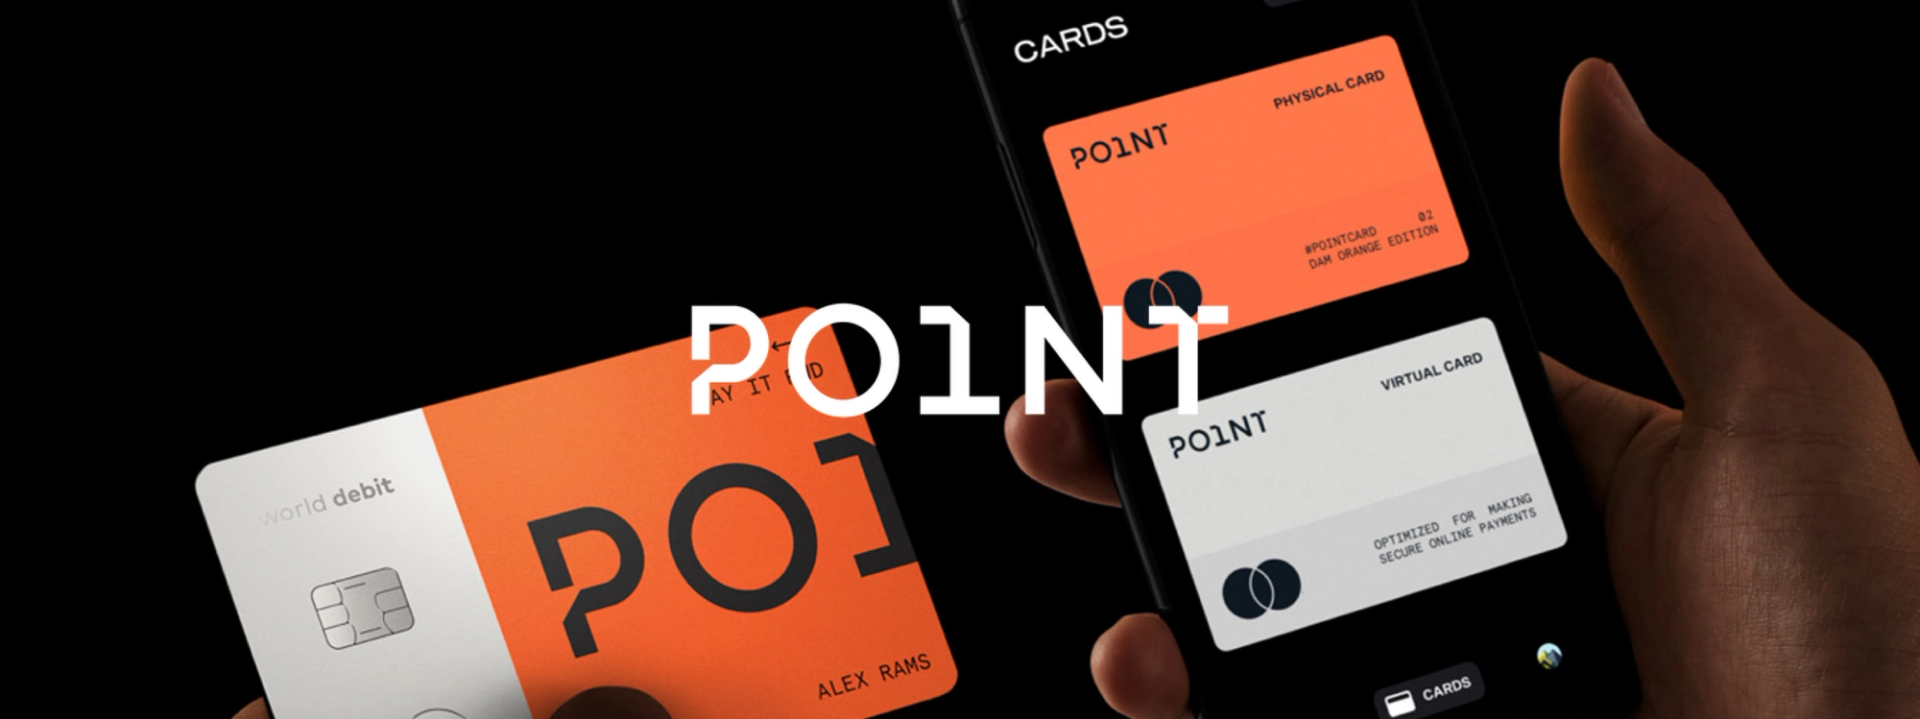 How PointCard Increased CTR 3.5X With Social Ads - Superside